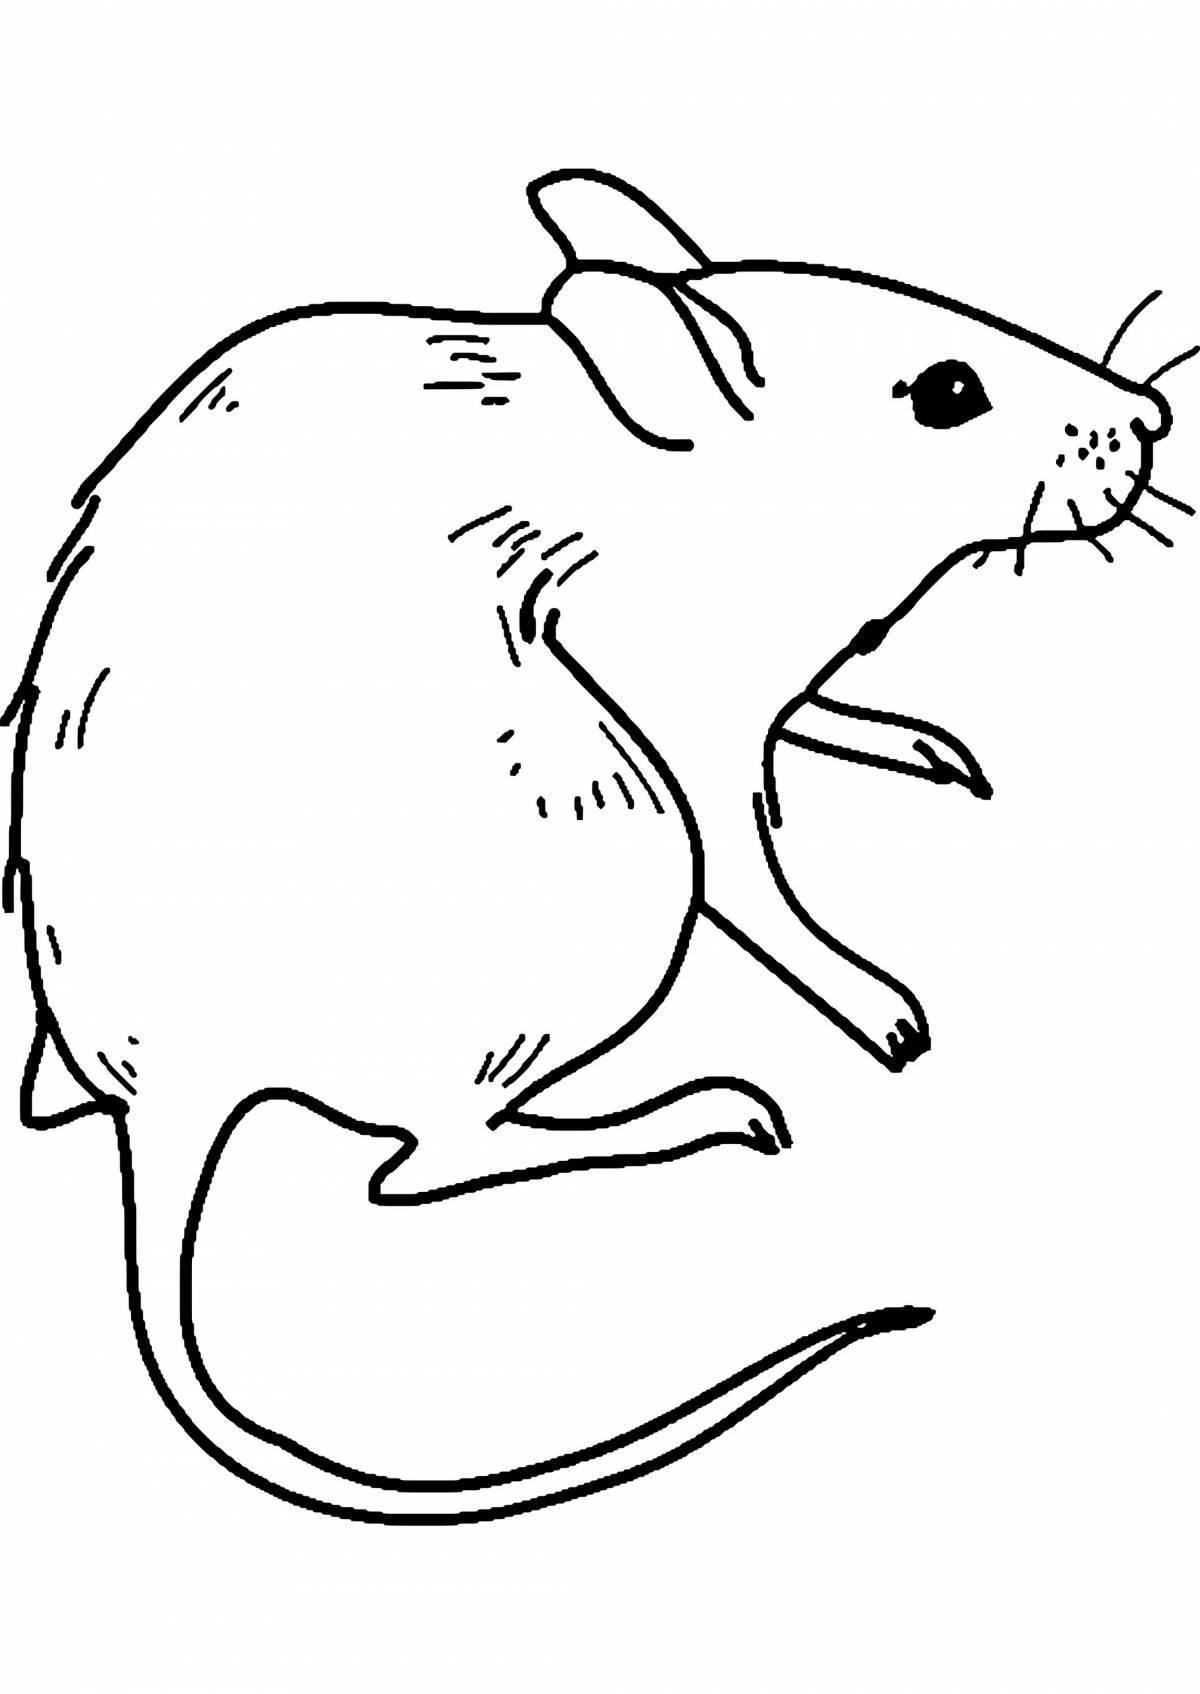 Colorful mouse vole coloring book